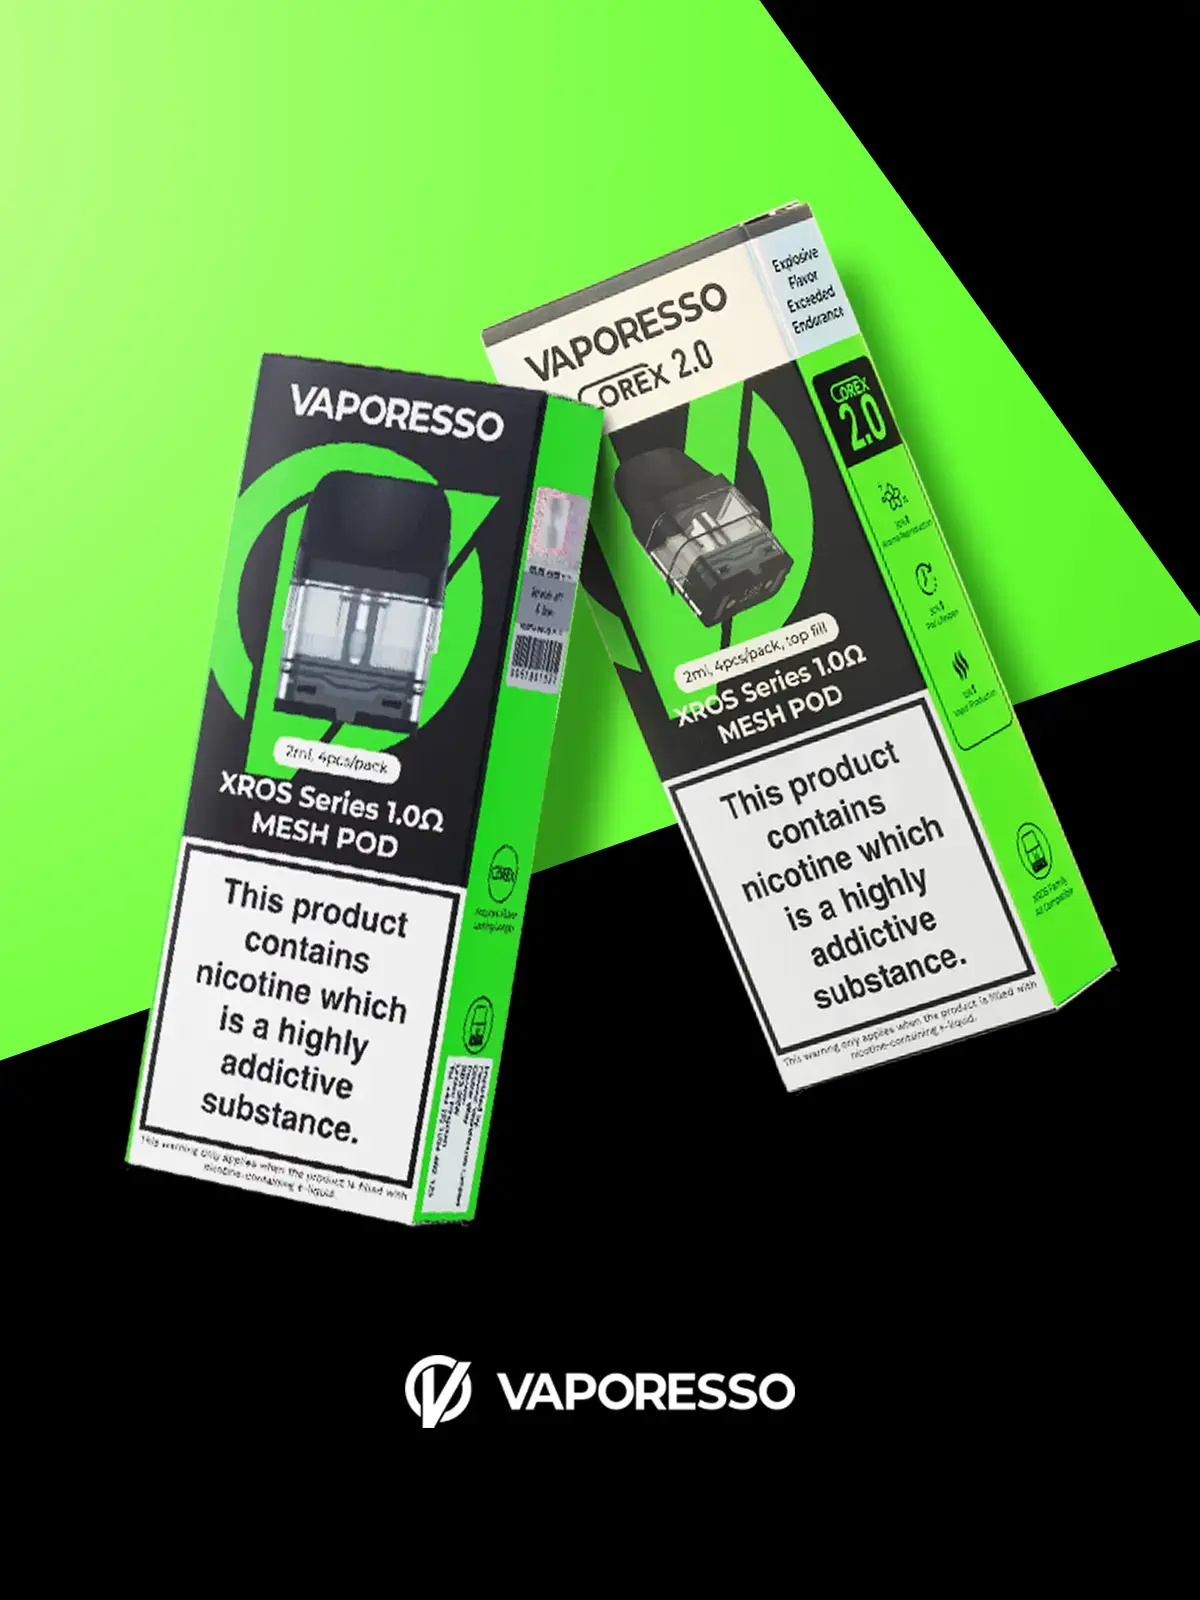 Two boxes of 1.0ohm Mesh Vaporesso XROS series pods floating in front of a stylised green and black background featuring the Vaporesso logo